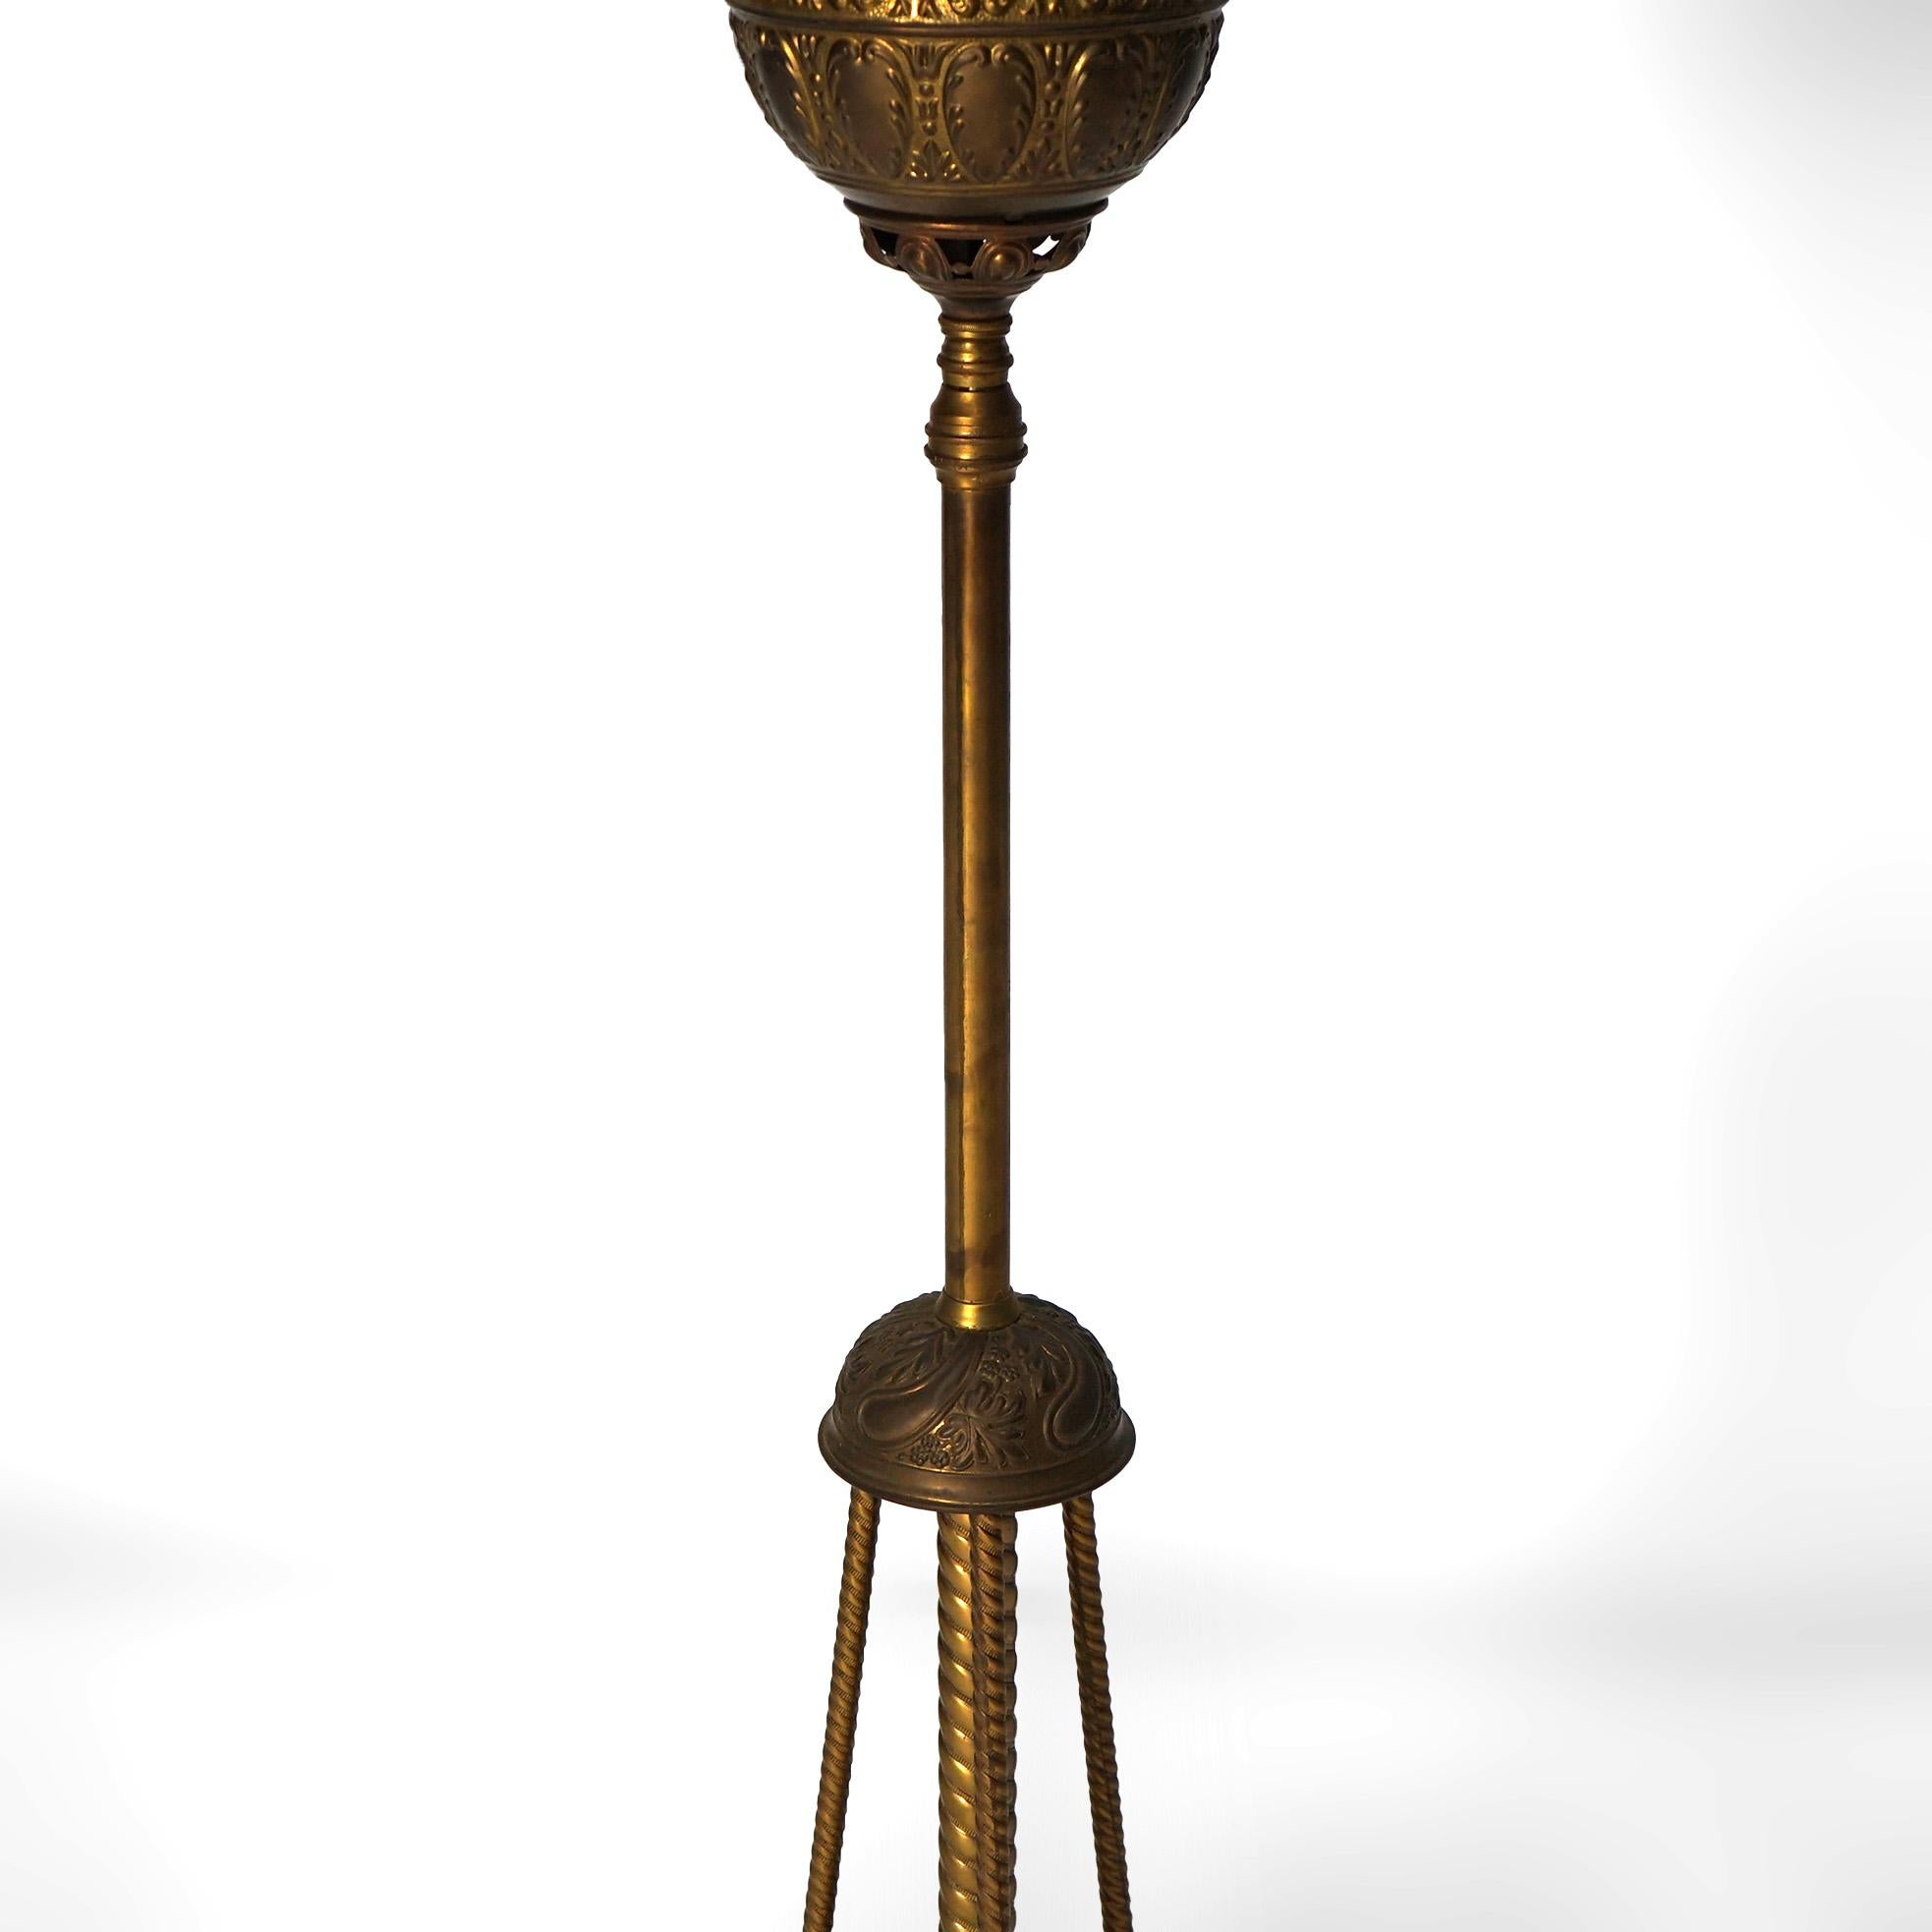 Hand-Painted Antique Brass Telescoping Piano Oil Lamp & Hand Painted Floral Shade c1890 For Sale